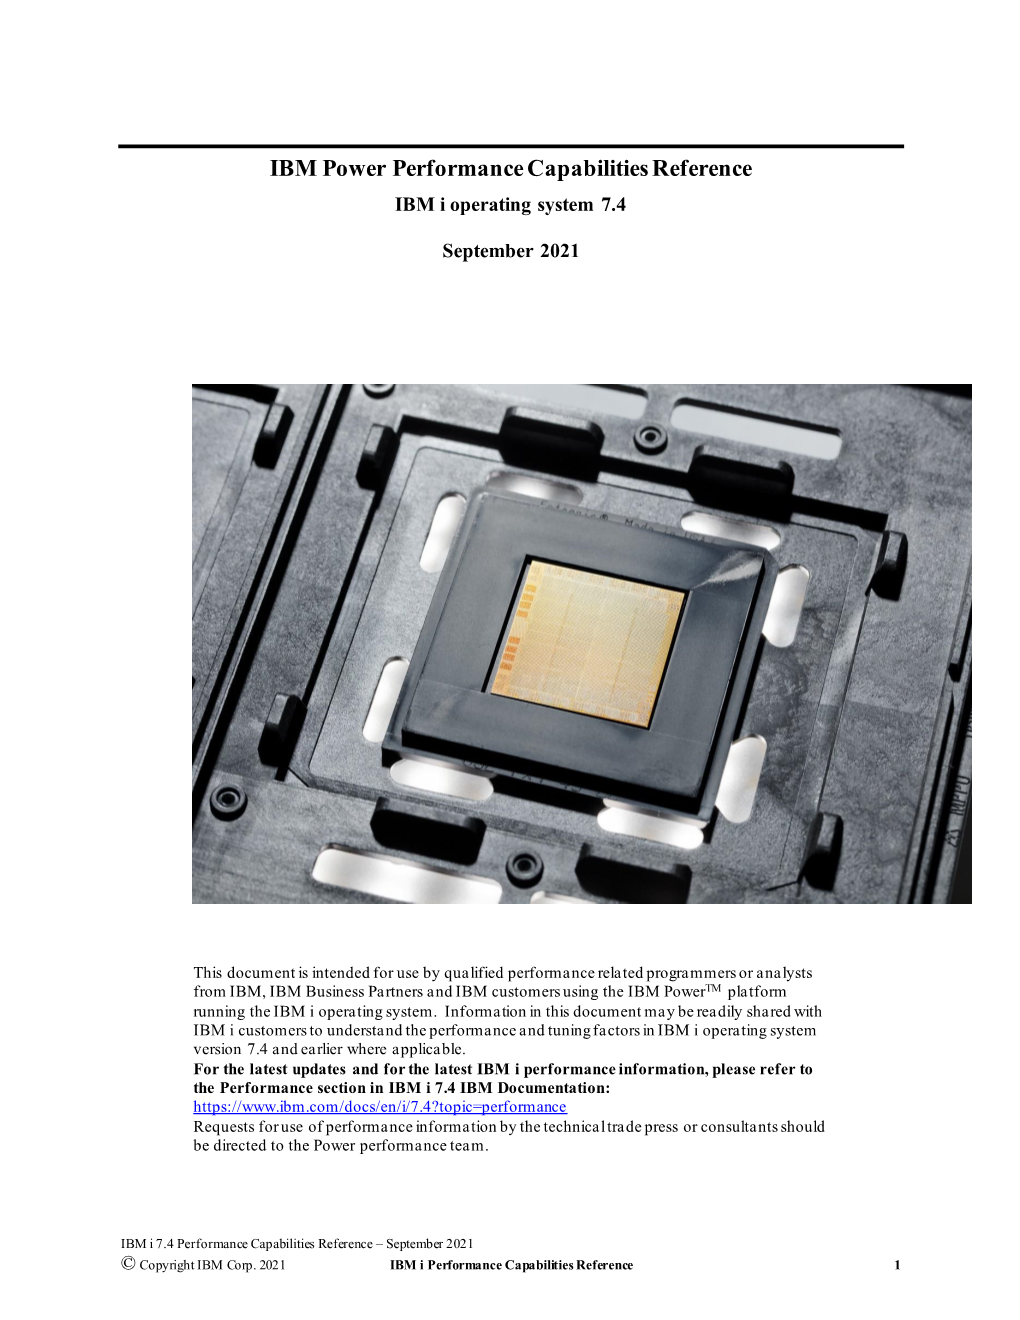 IBM Power Systems Performance Capabilities Reference (Forty- Sixth Edition February 2017)